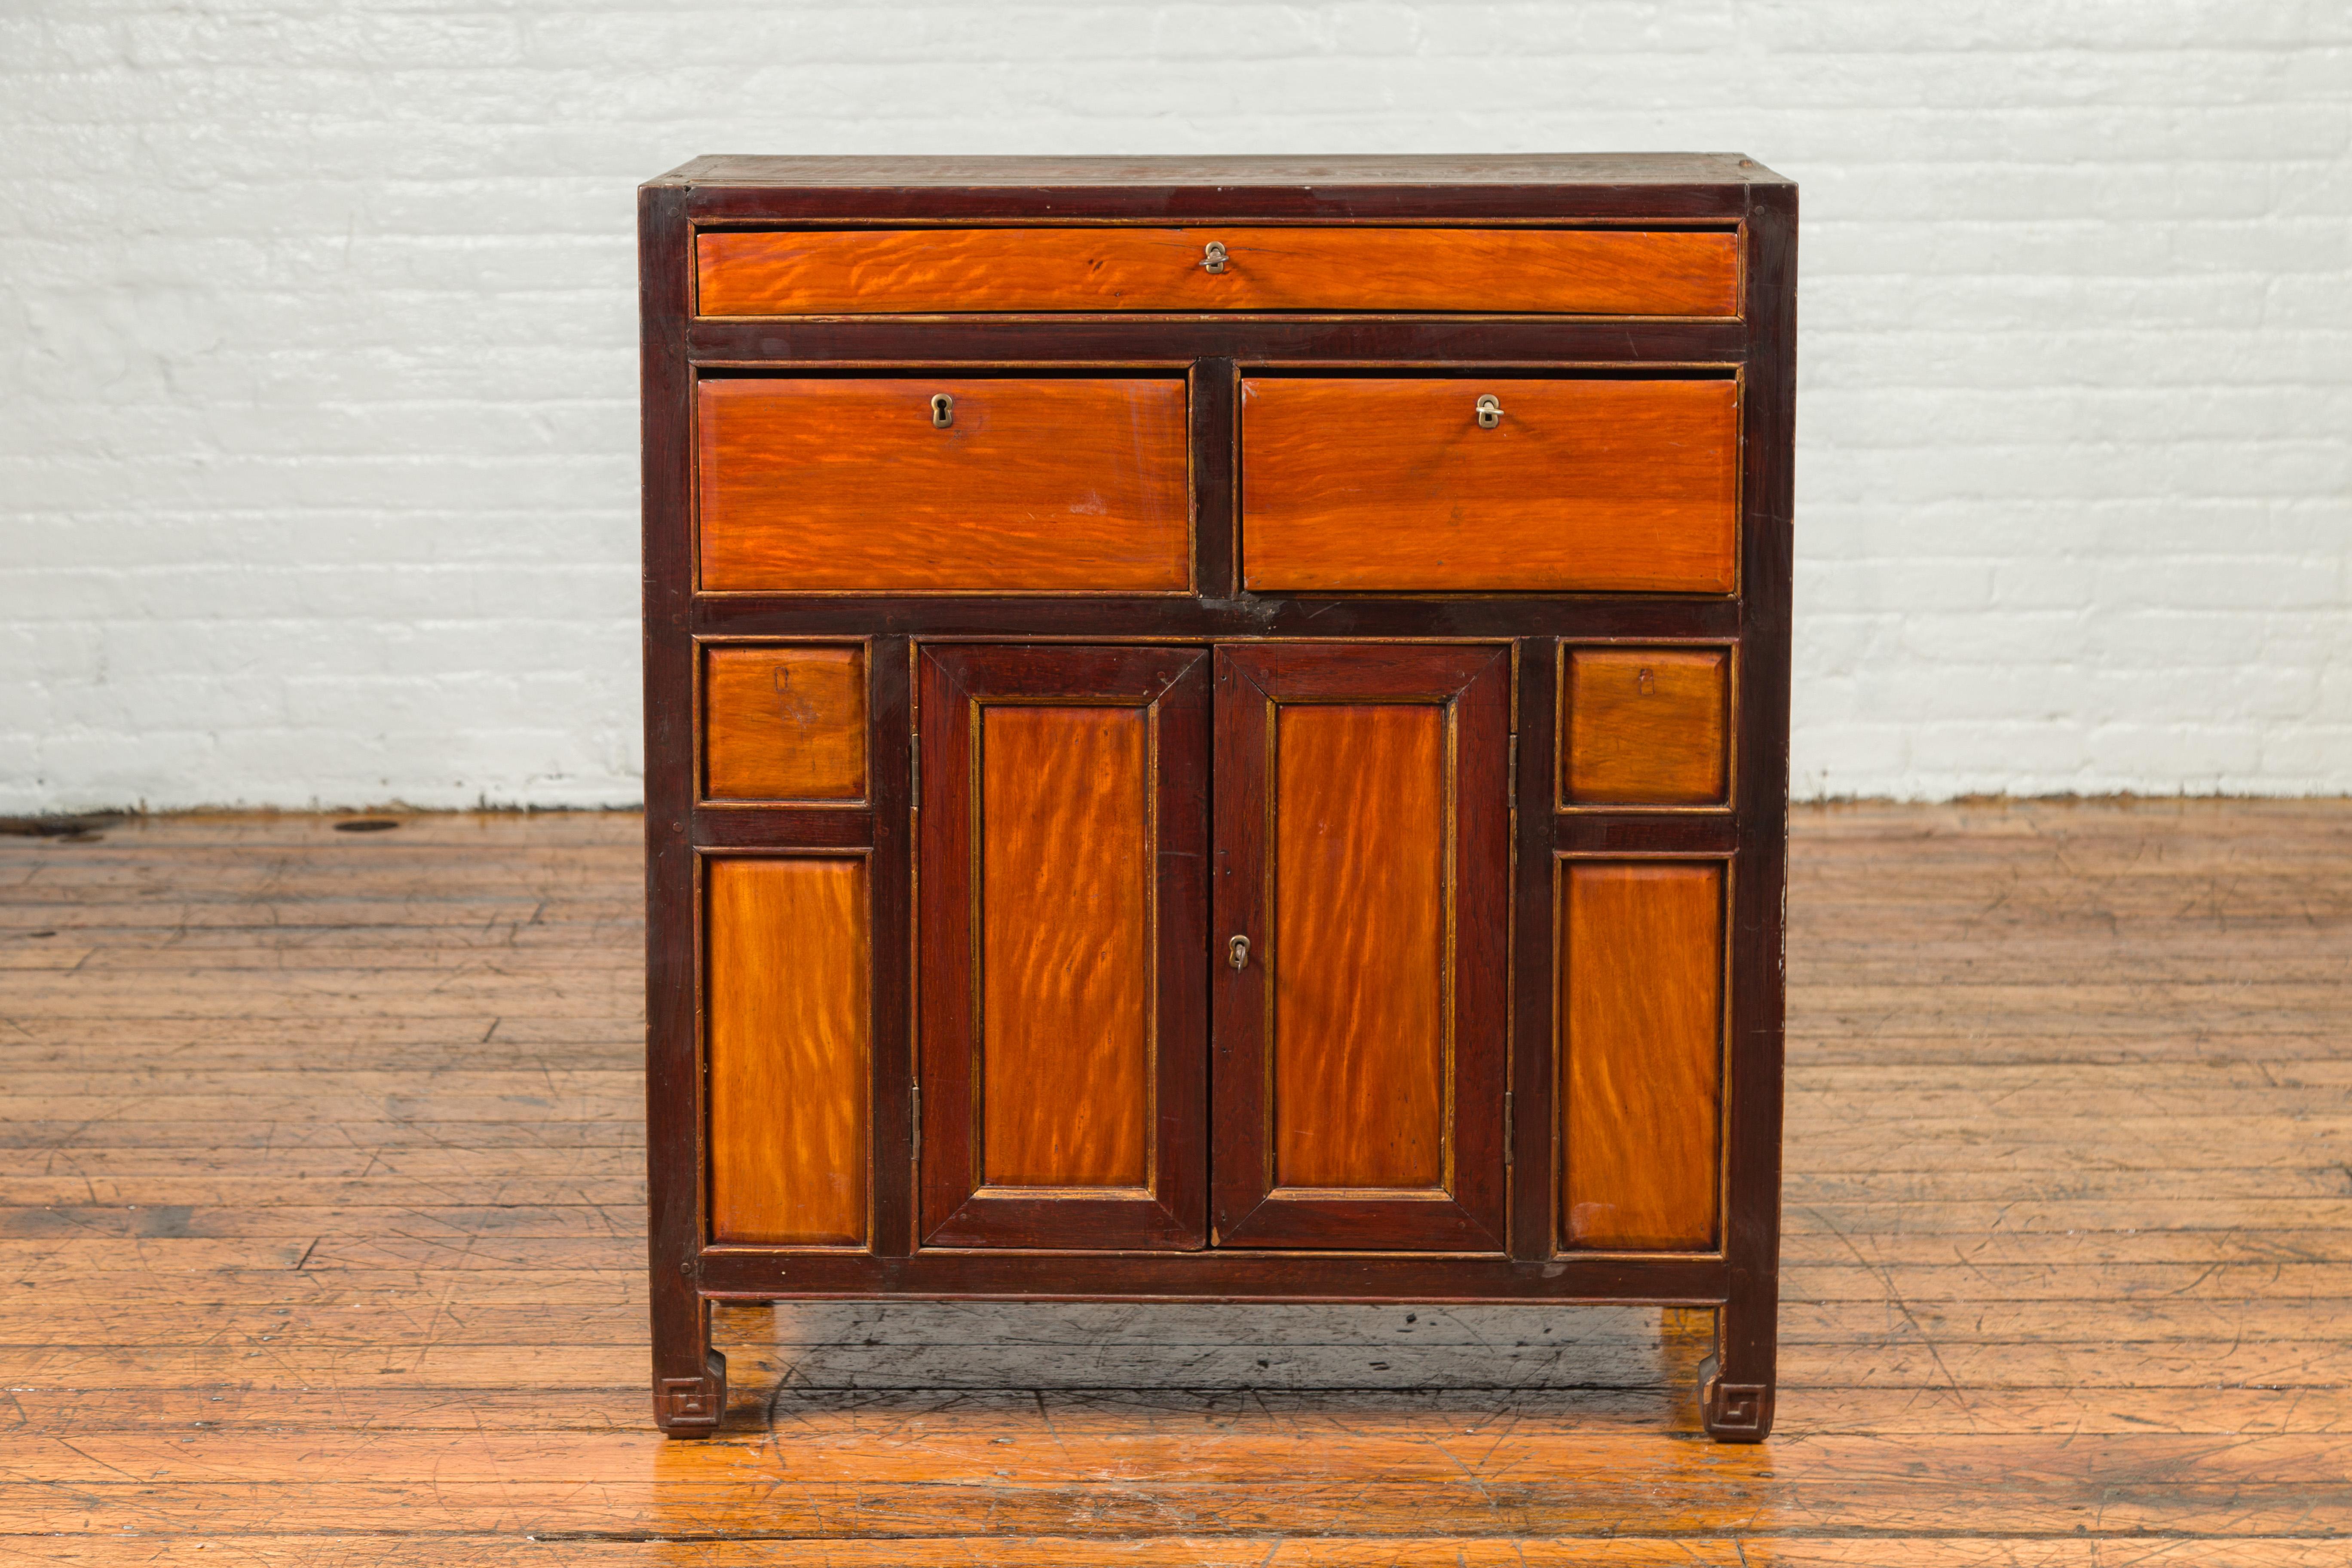 A Chinese vintage two-toned side chest from the mid-20th century, with three drawers over a pair of double doors. Crafted in China during the mid-century period, this side chest attracts our attention with its two-toned finish complimenting the